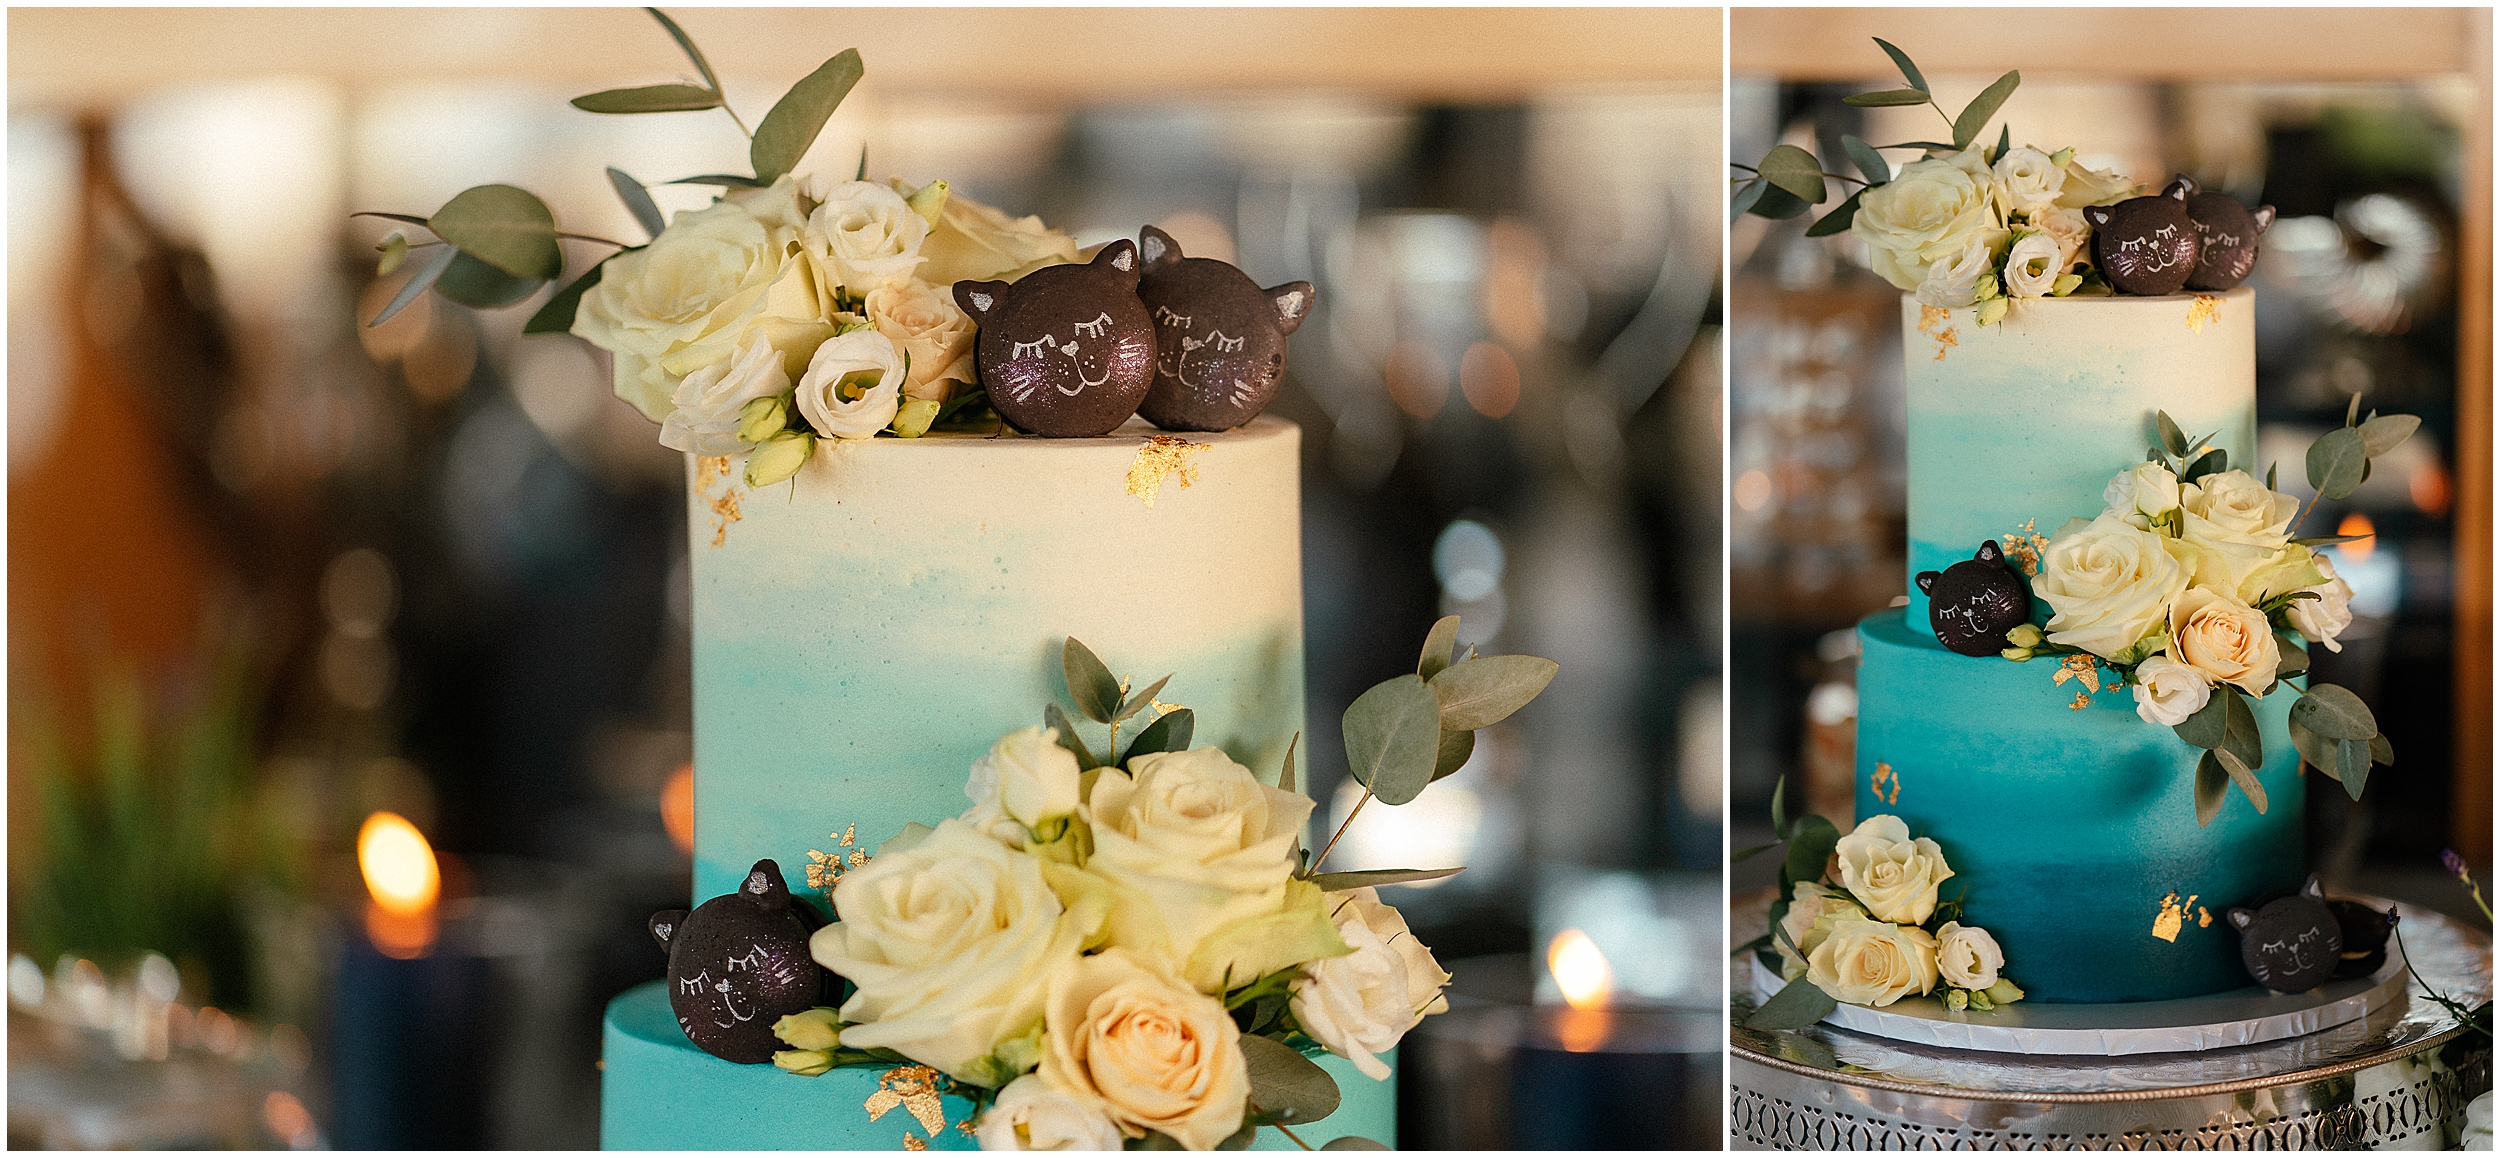 Wedding details at the Greenwich Yacht Club in London.